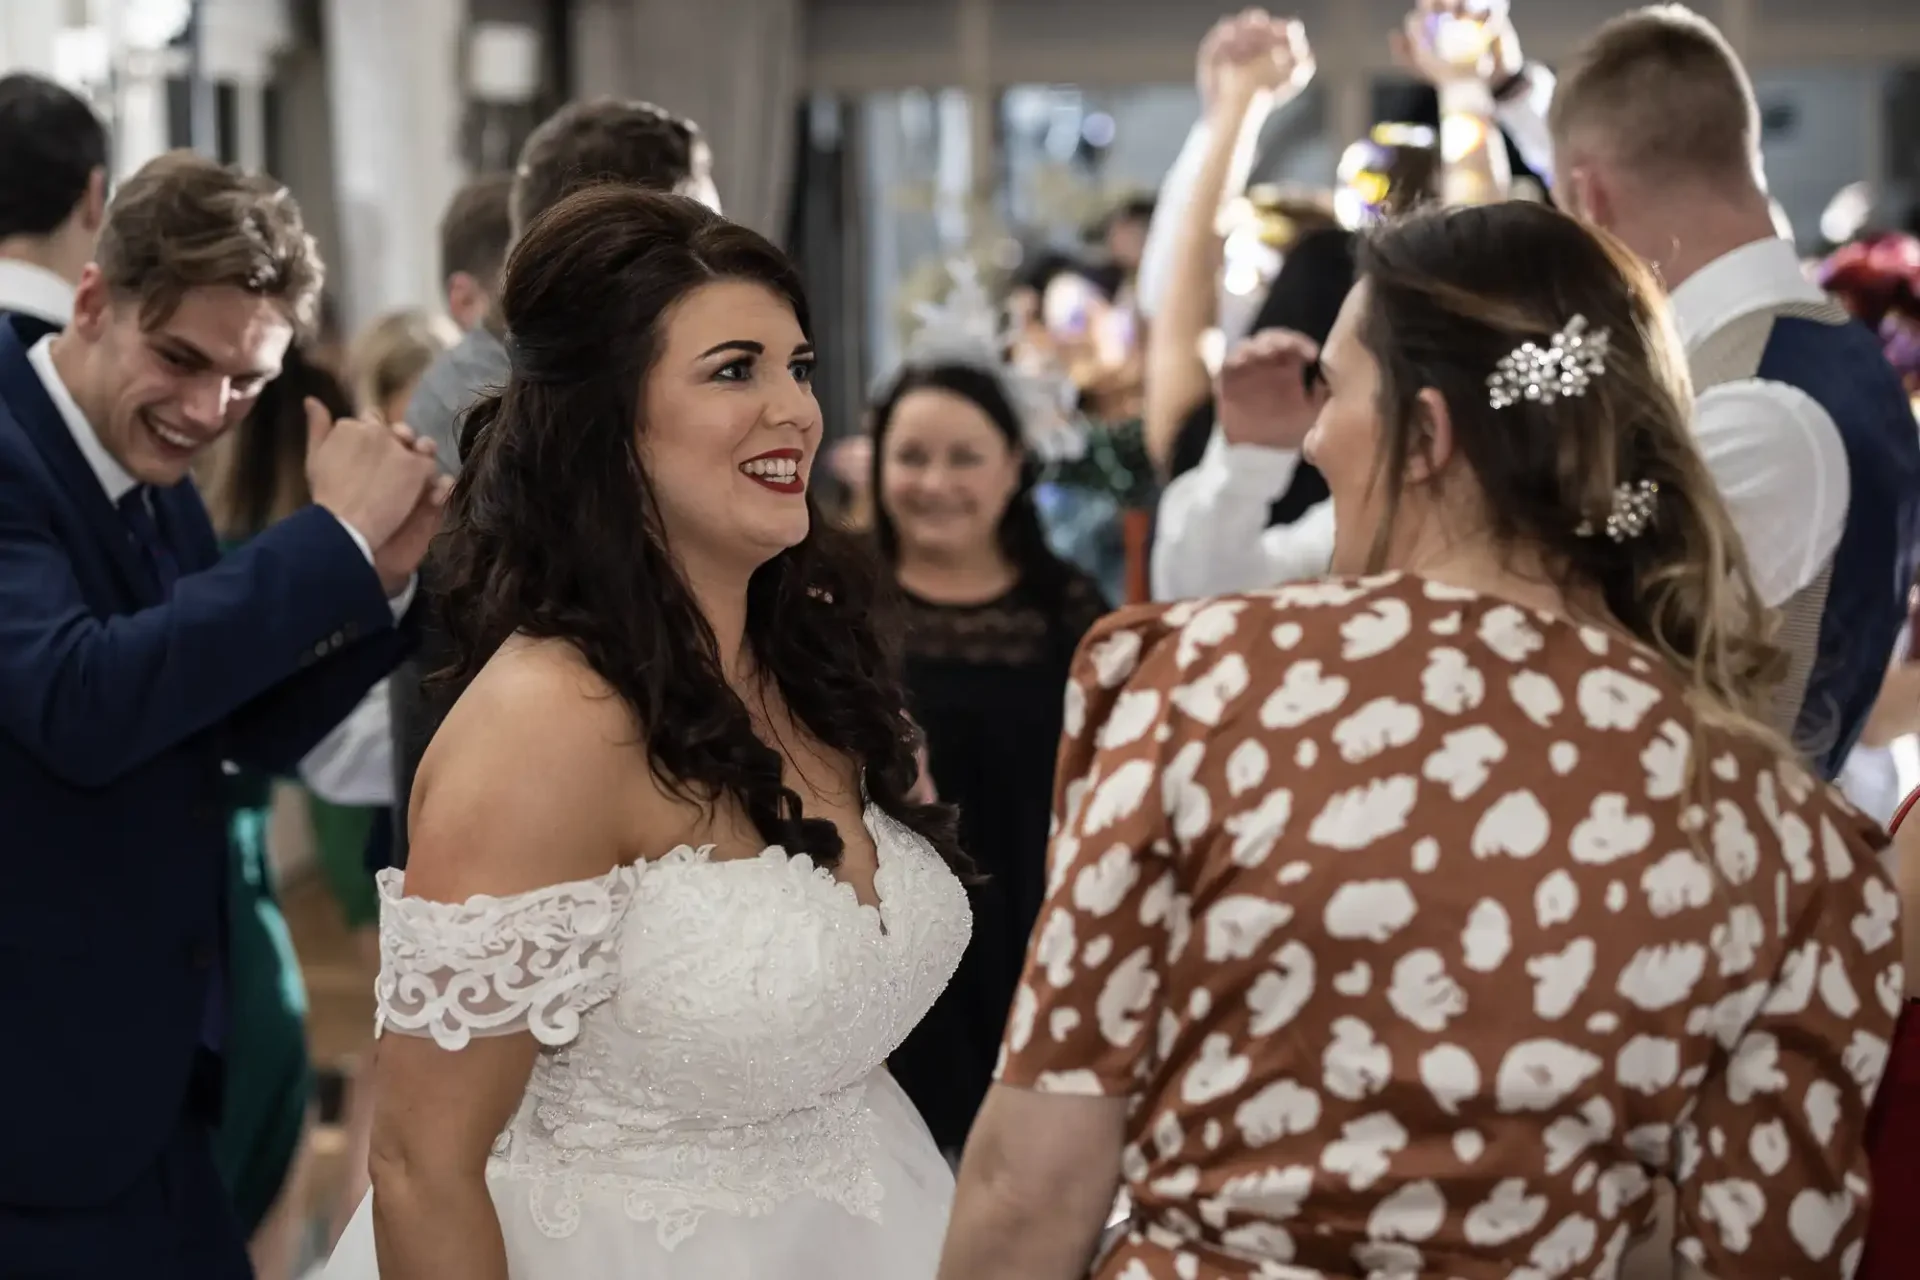 A bride in a white dress laughing and dancing with guests at a lively indoor wedding reception.